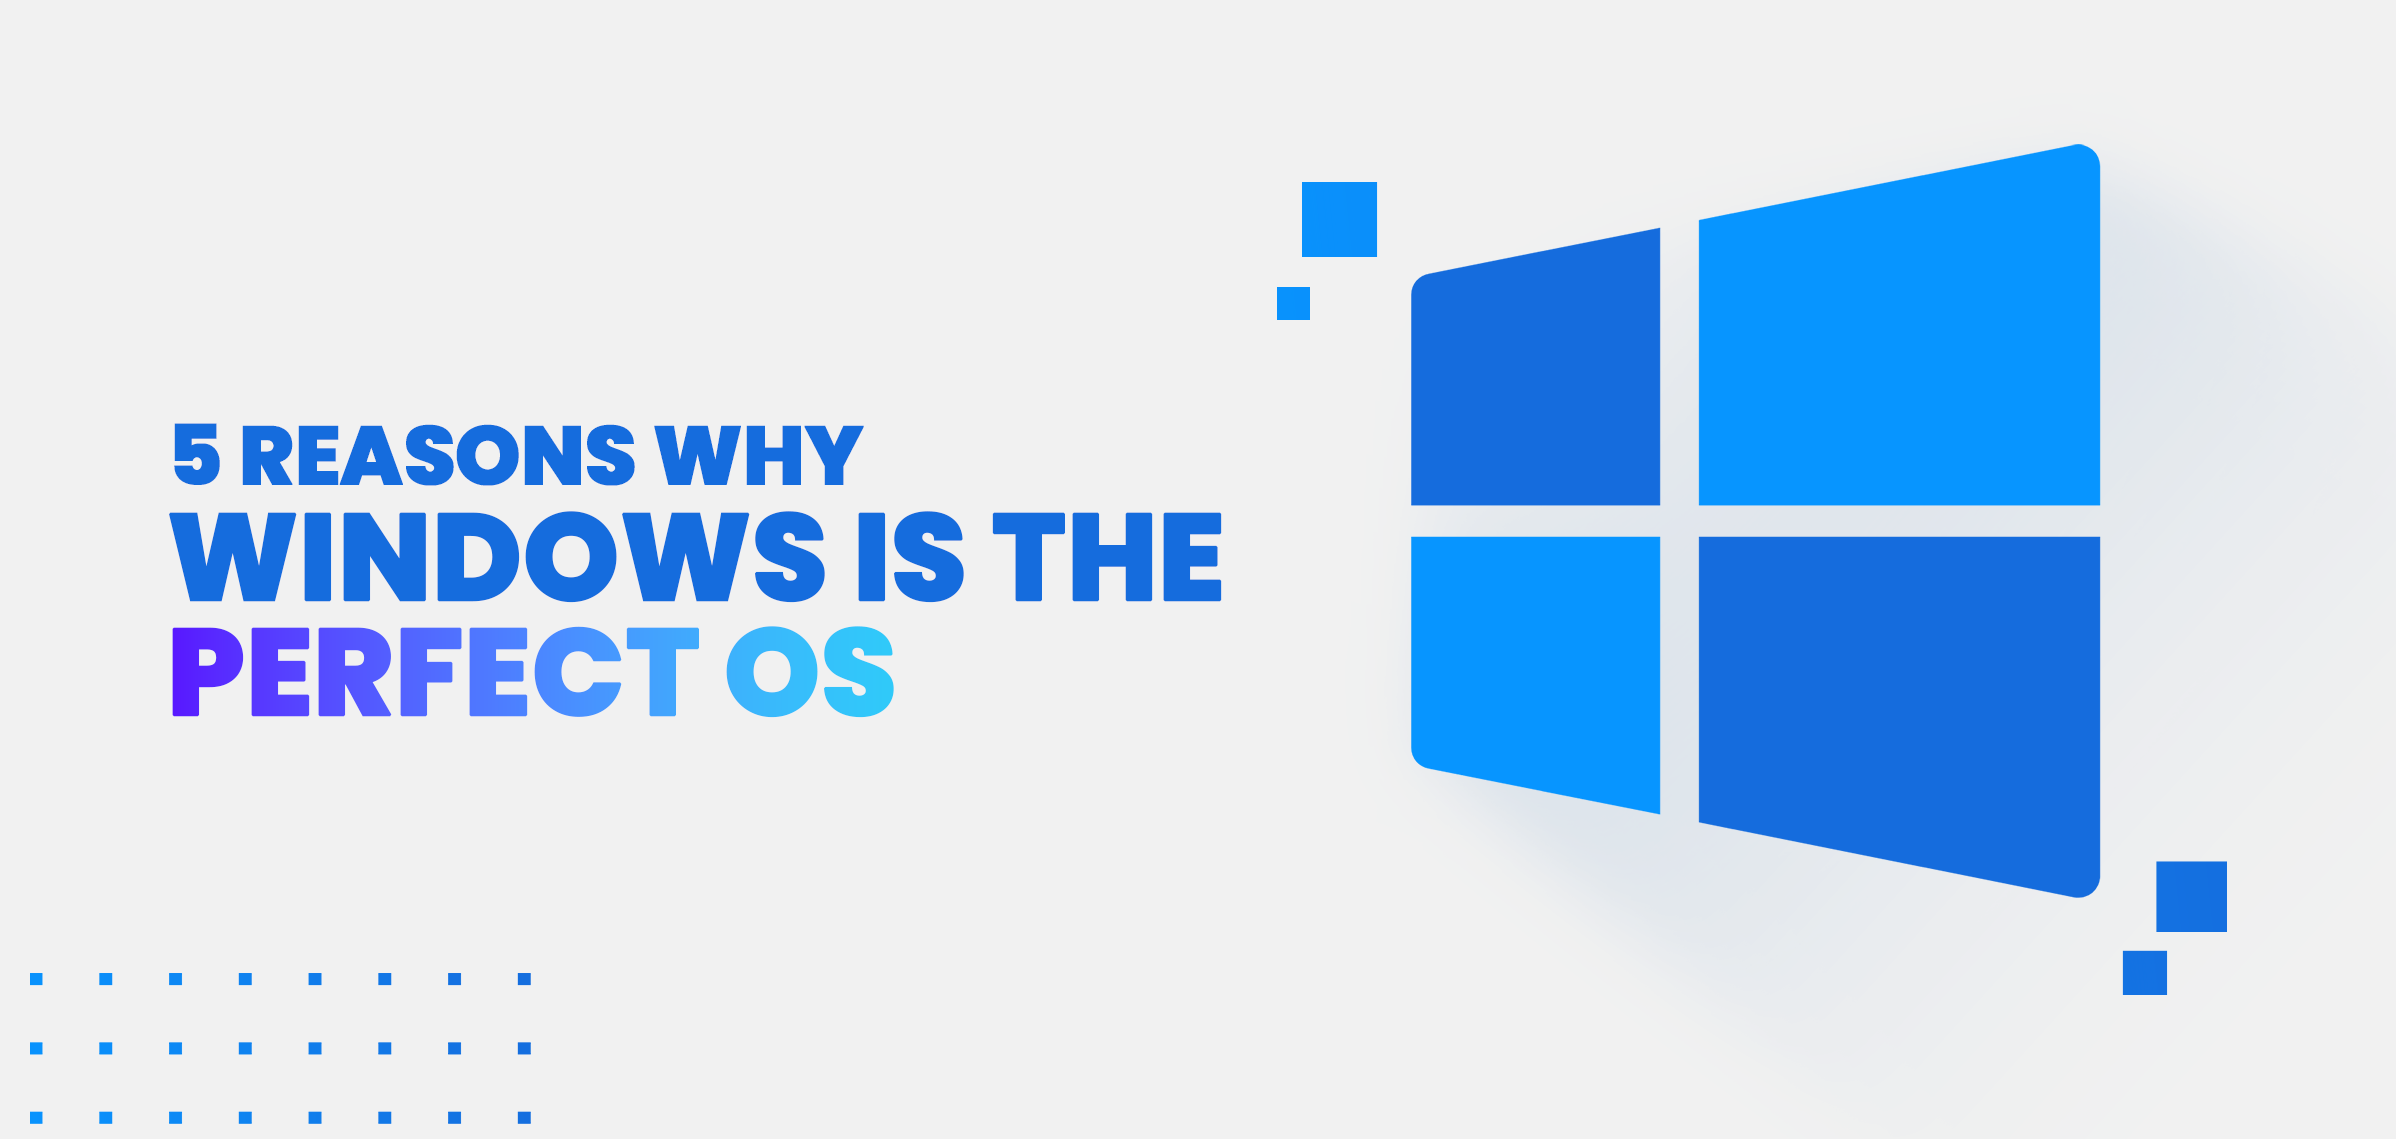 5 Features That Make Windows 10 the Perfect OS